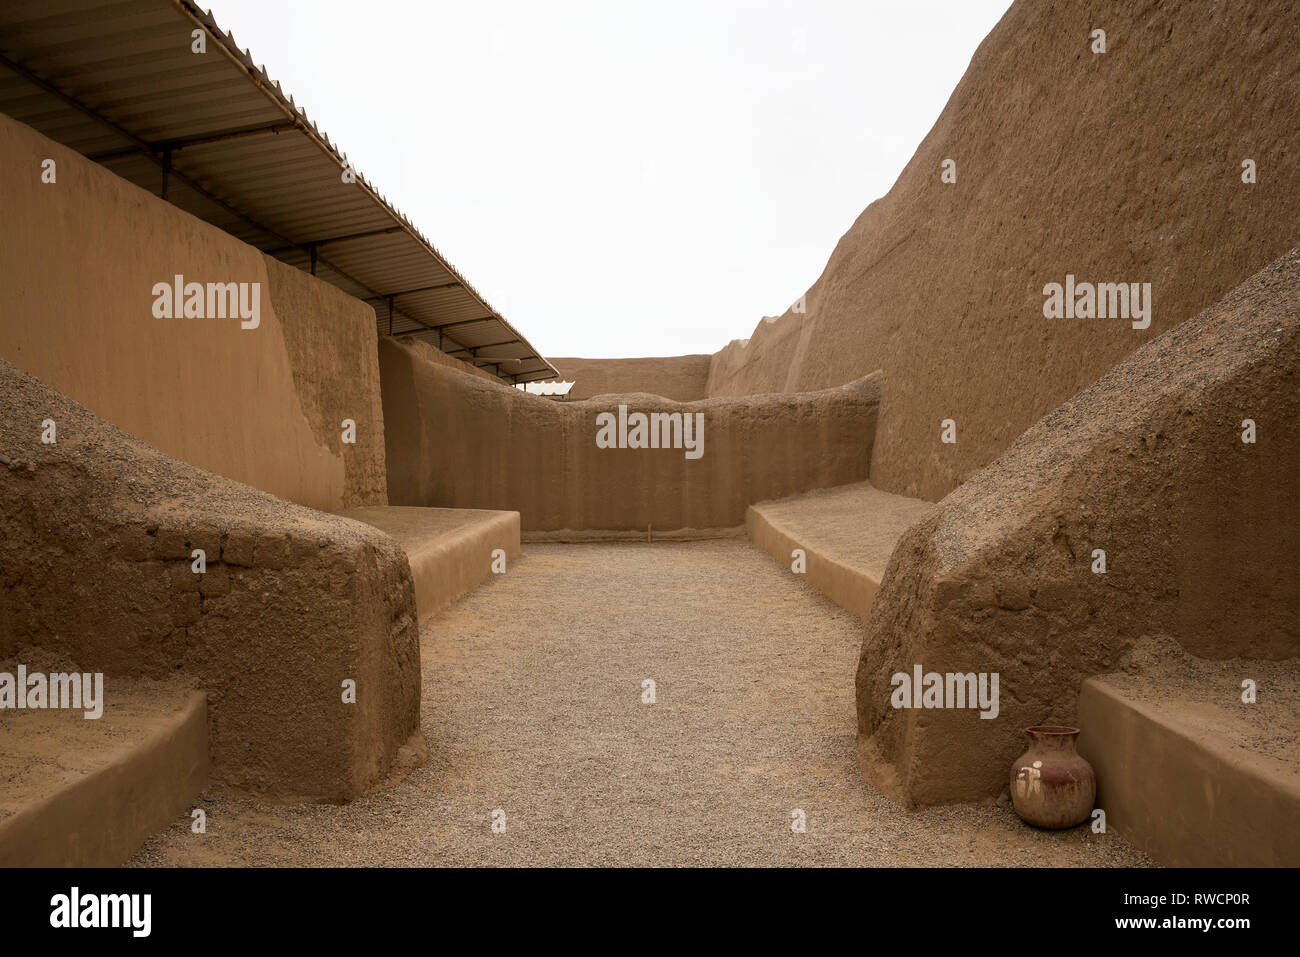 Adobe walls of the city of Chan Chan, capital of the Chimú kingdom. Chan Chan archaeological site, Unesco World Heritage. Trujillo, Peru. Jul 2018 Stock Photo